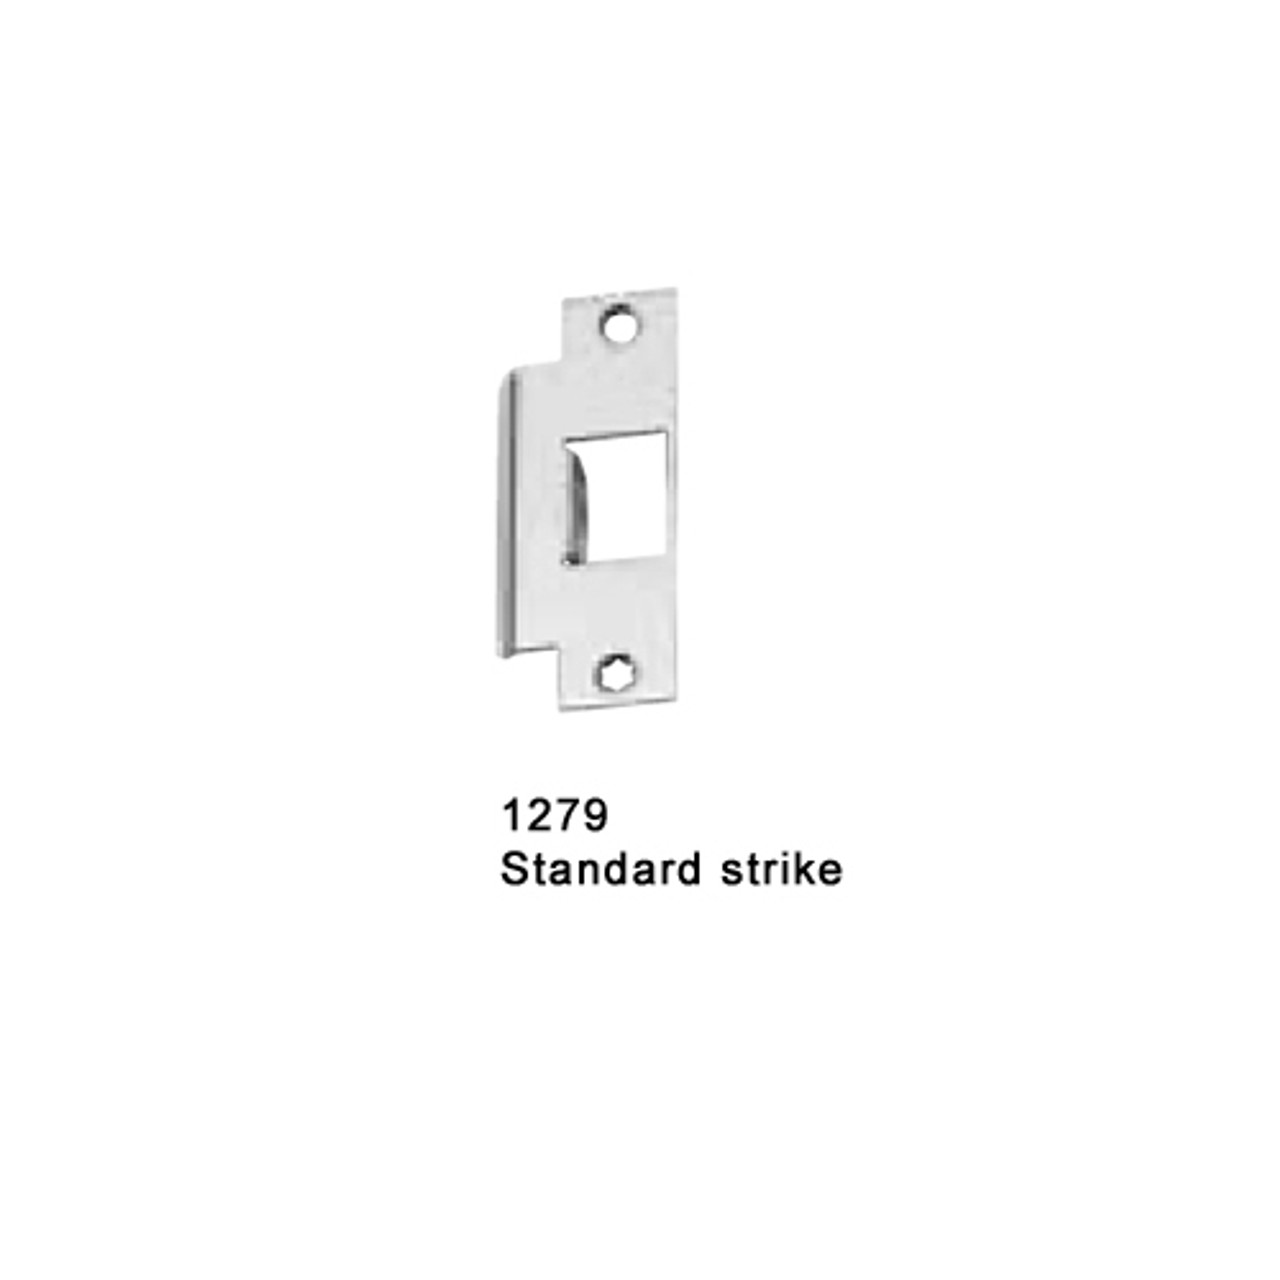 F-25-M-DT-US32-3-RHR Falcon 25 Series Fire Rated Mortise Lock Devices with 512DT Dummy Trim in Polished Stainless Steel